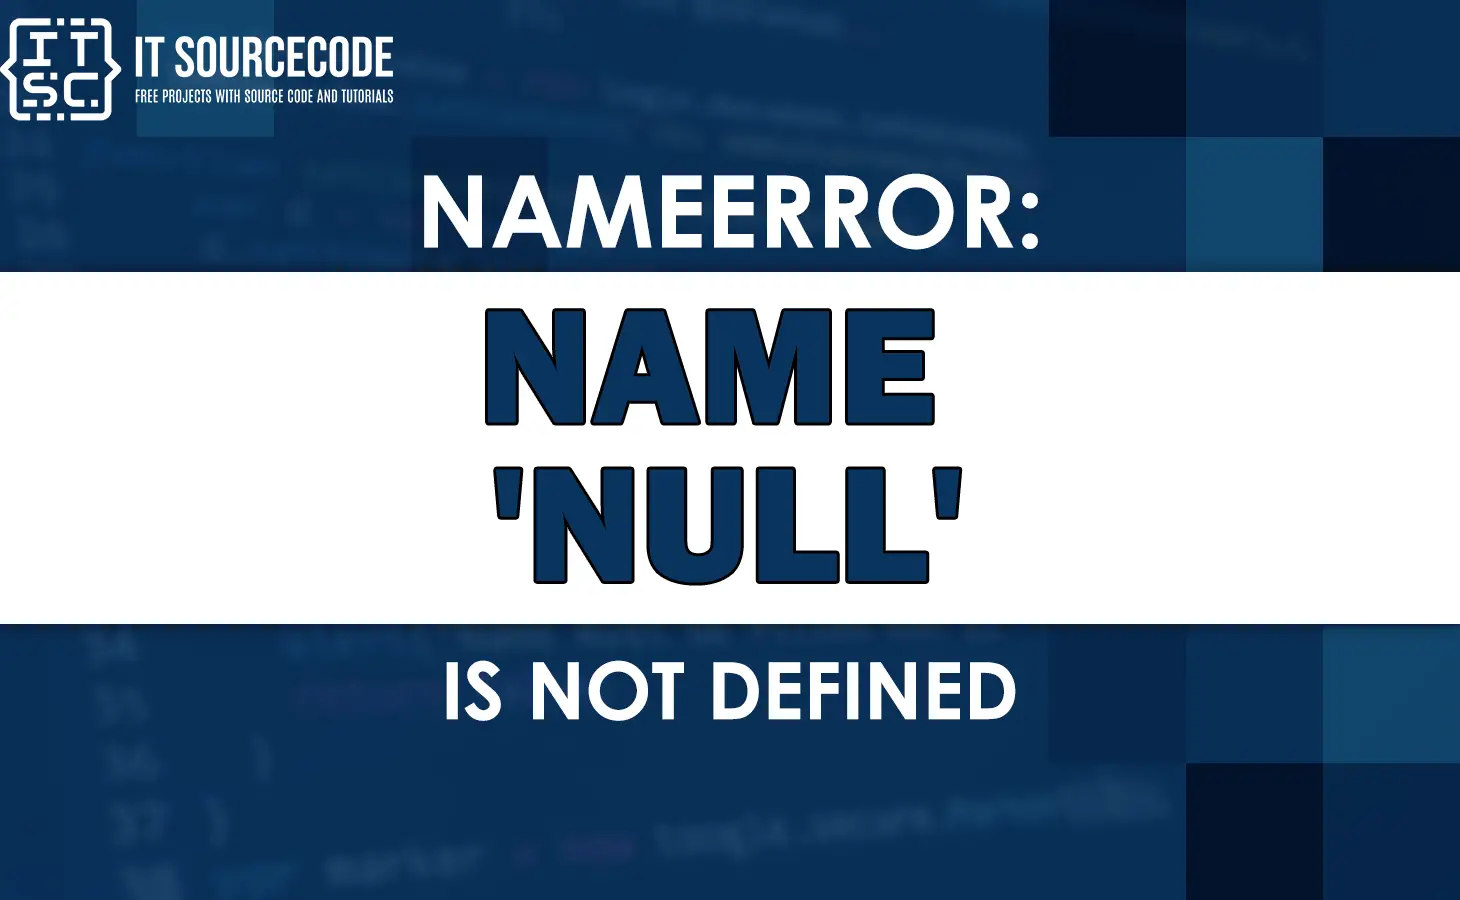 Nameerror: name 'null' is not defined